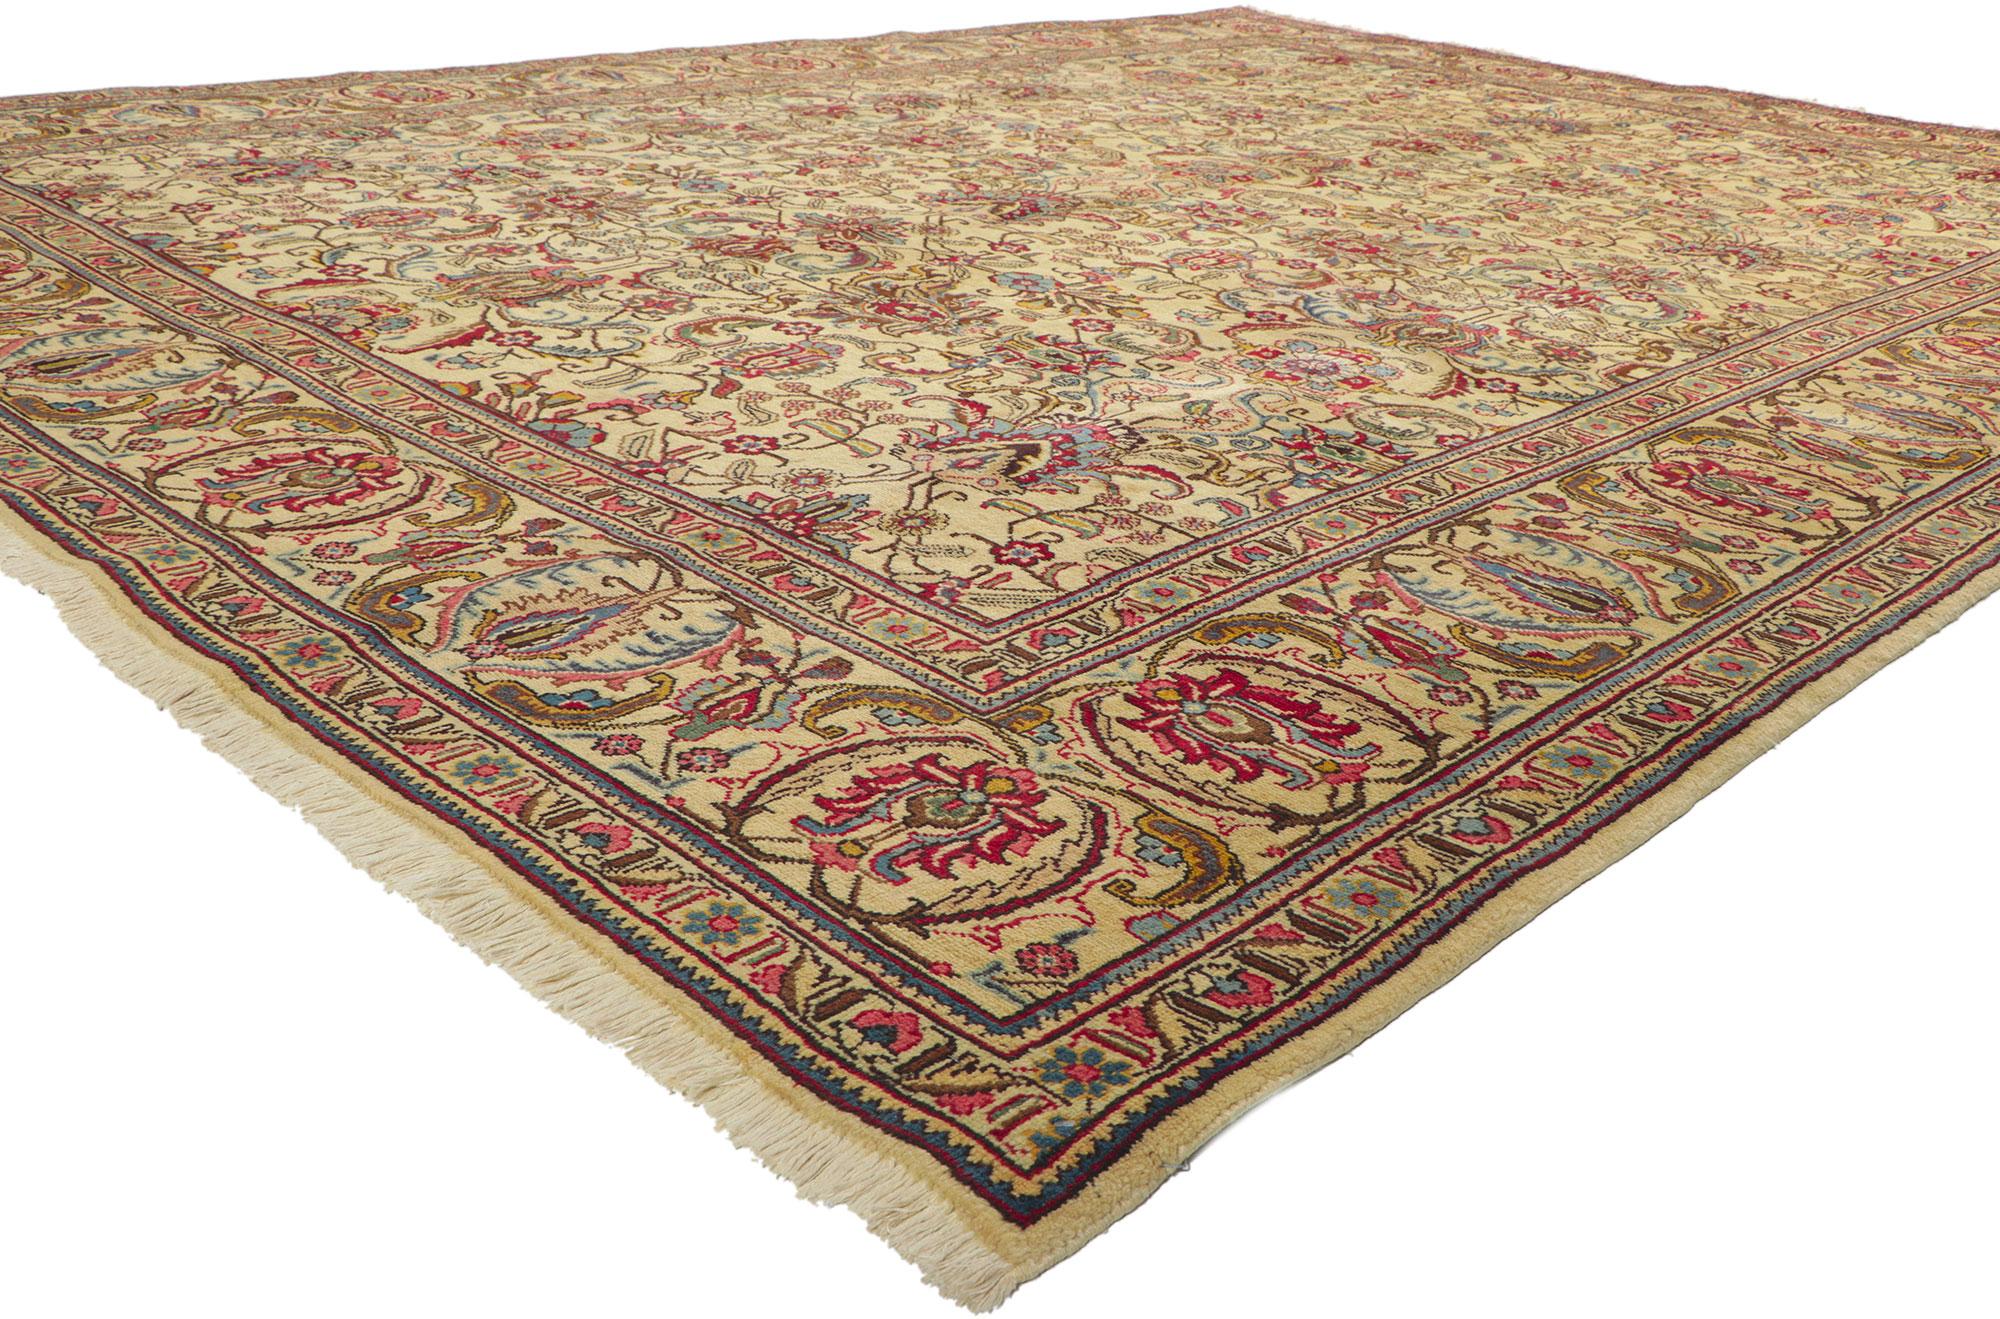 75888 Vintage Persian Tabriz Rug, 09'07 X 12'08. Emanating timeless design with incredible detail and texture, this hand knotted wool vintage Persian Tabriz rug is a captivating vision of woven beauty. The traditional style and sophisticated